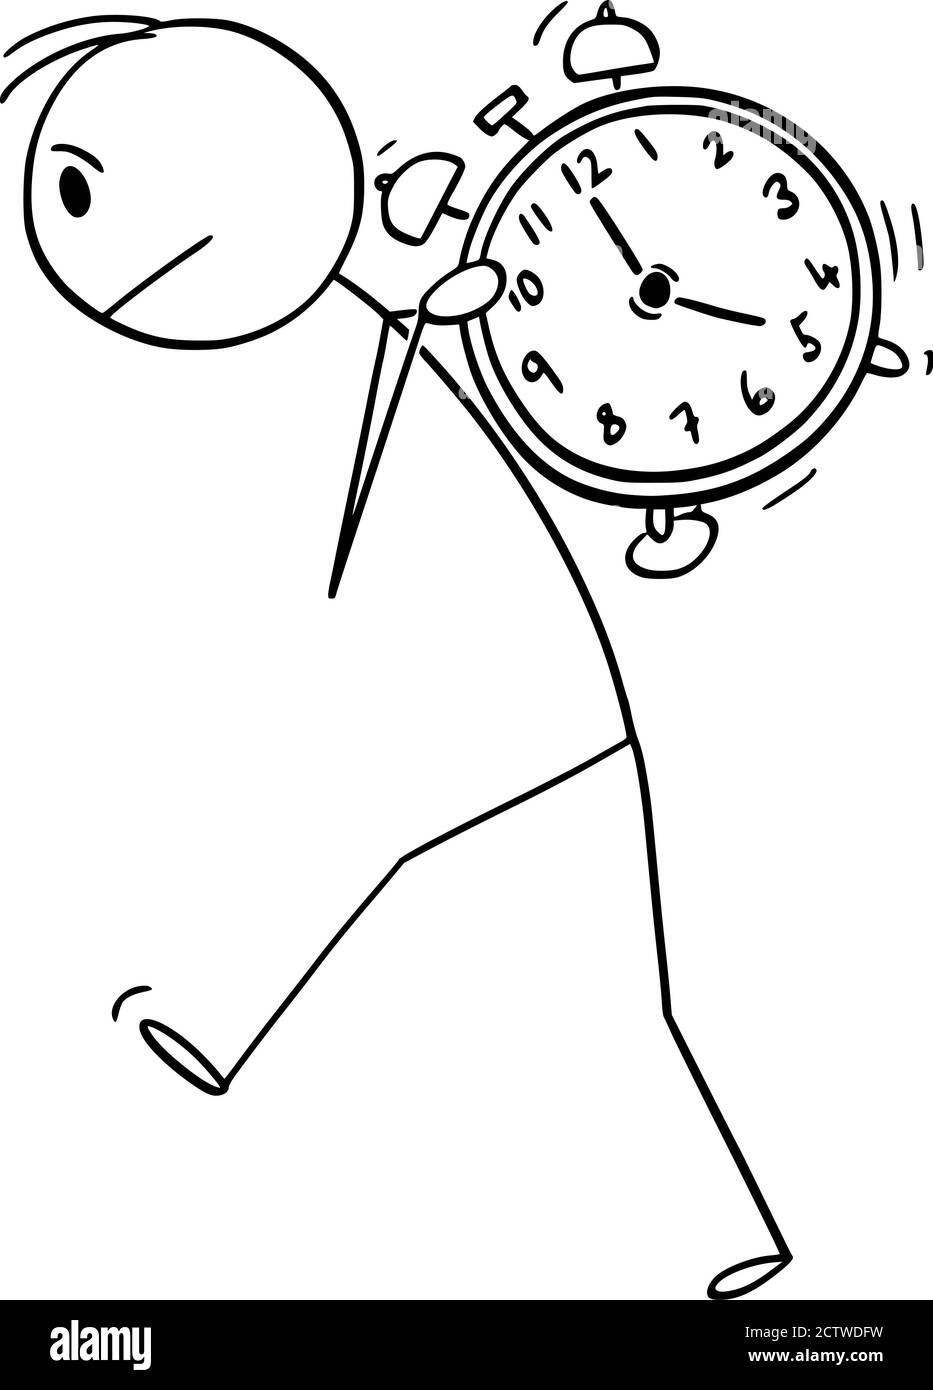 Man wants to stop the clock time management Vector Image